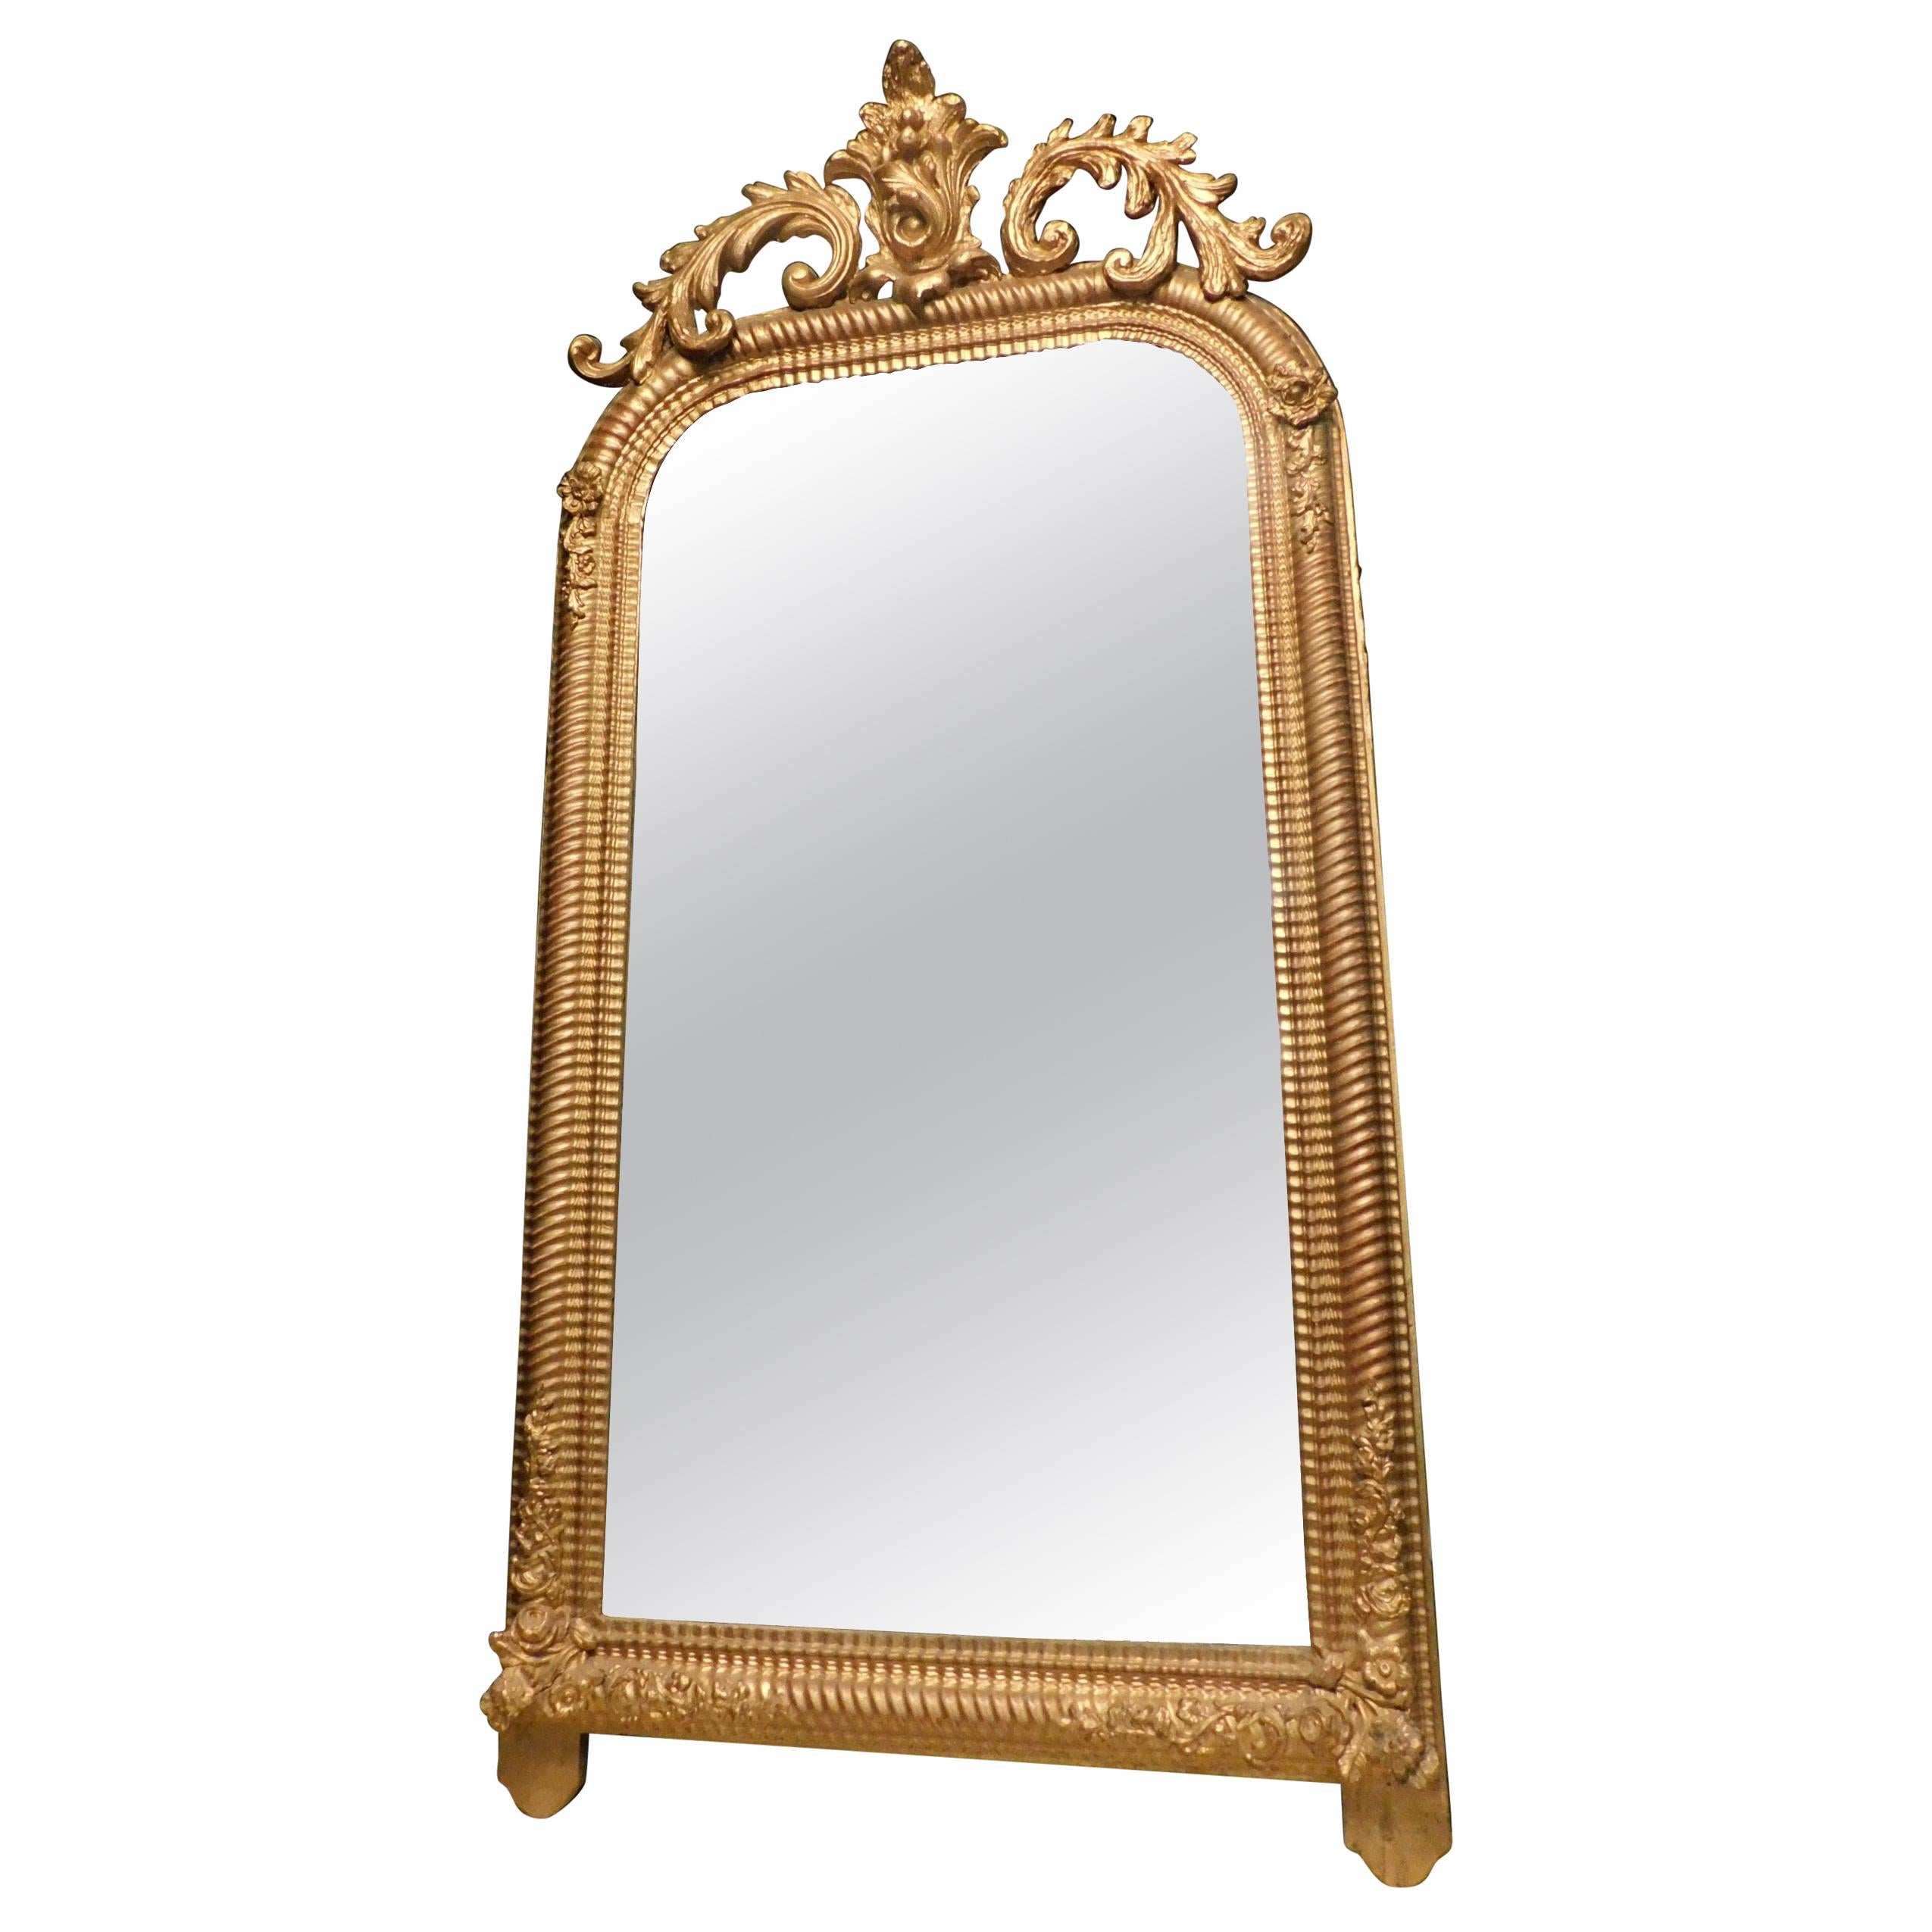 Antique Gilded Mirror with Sculpted Floreal Rib, 19th Century, Italy